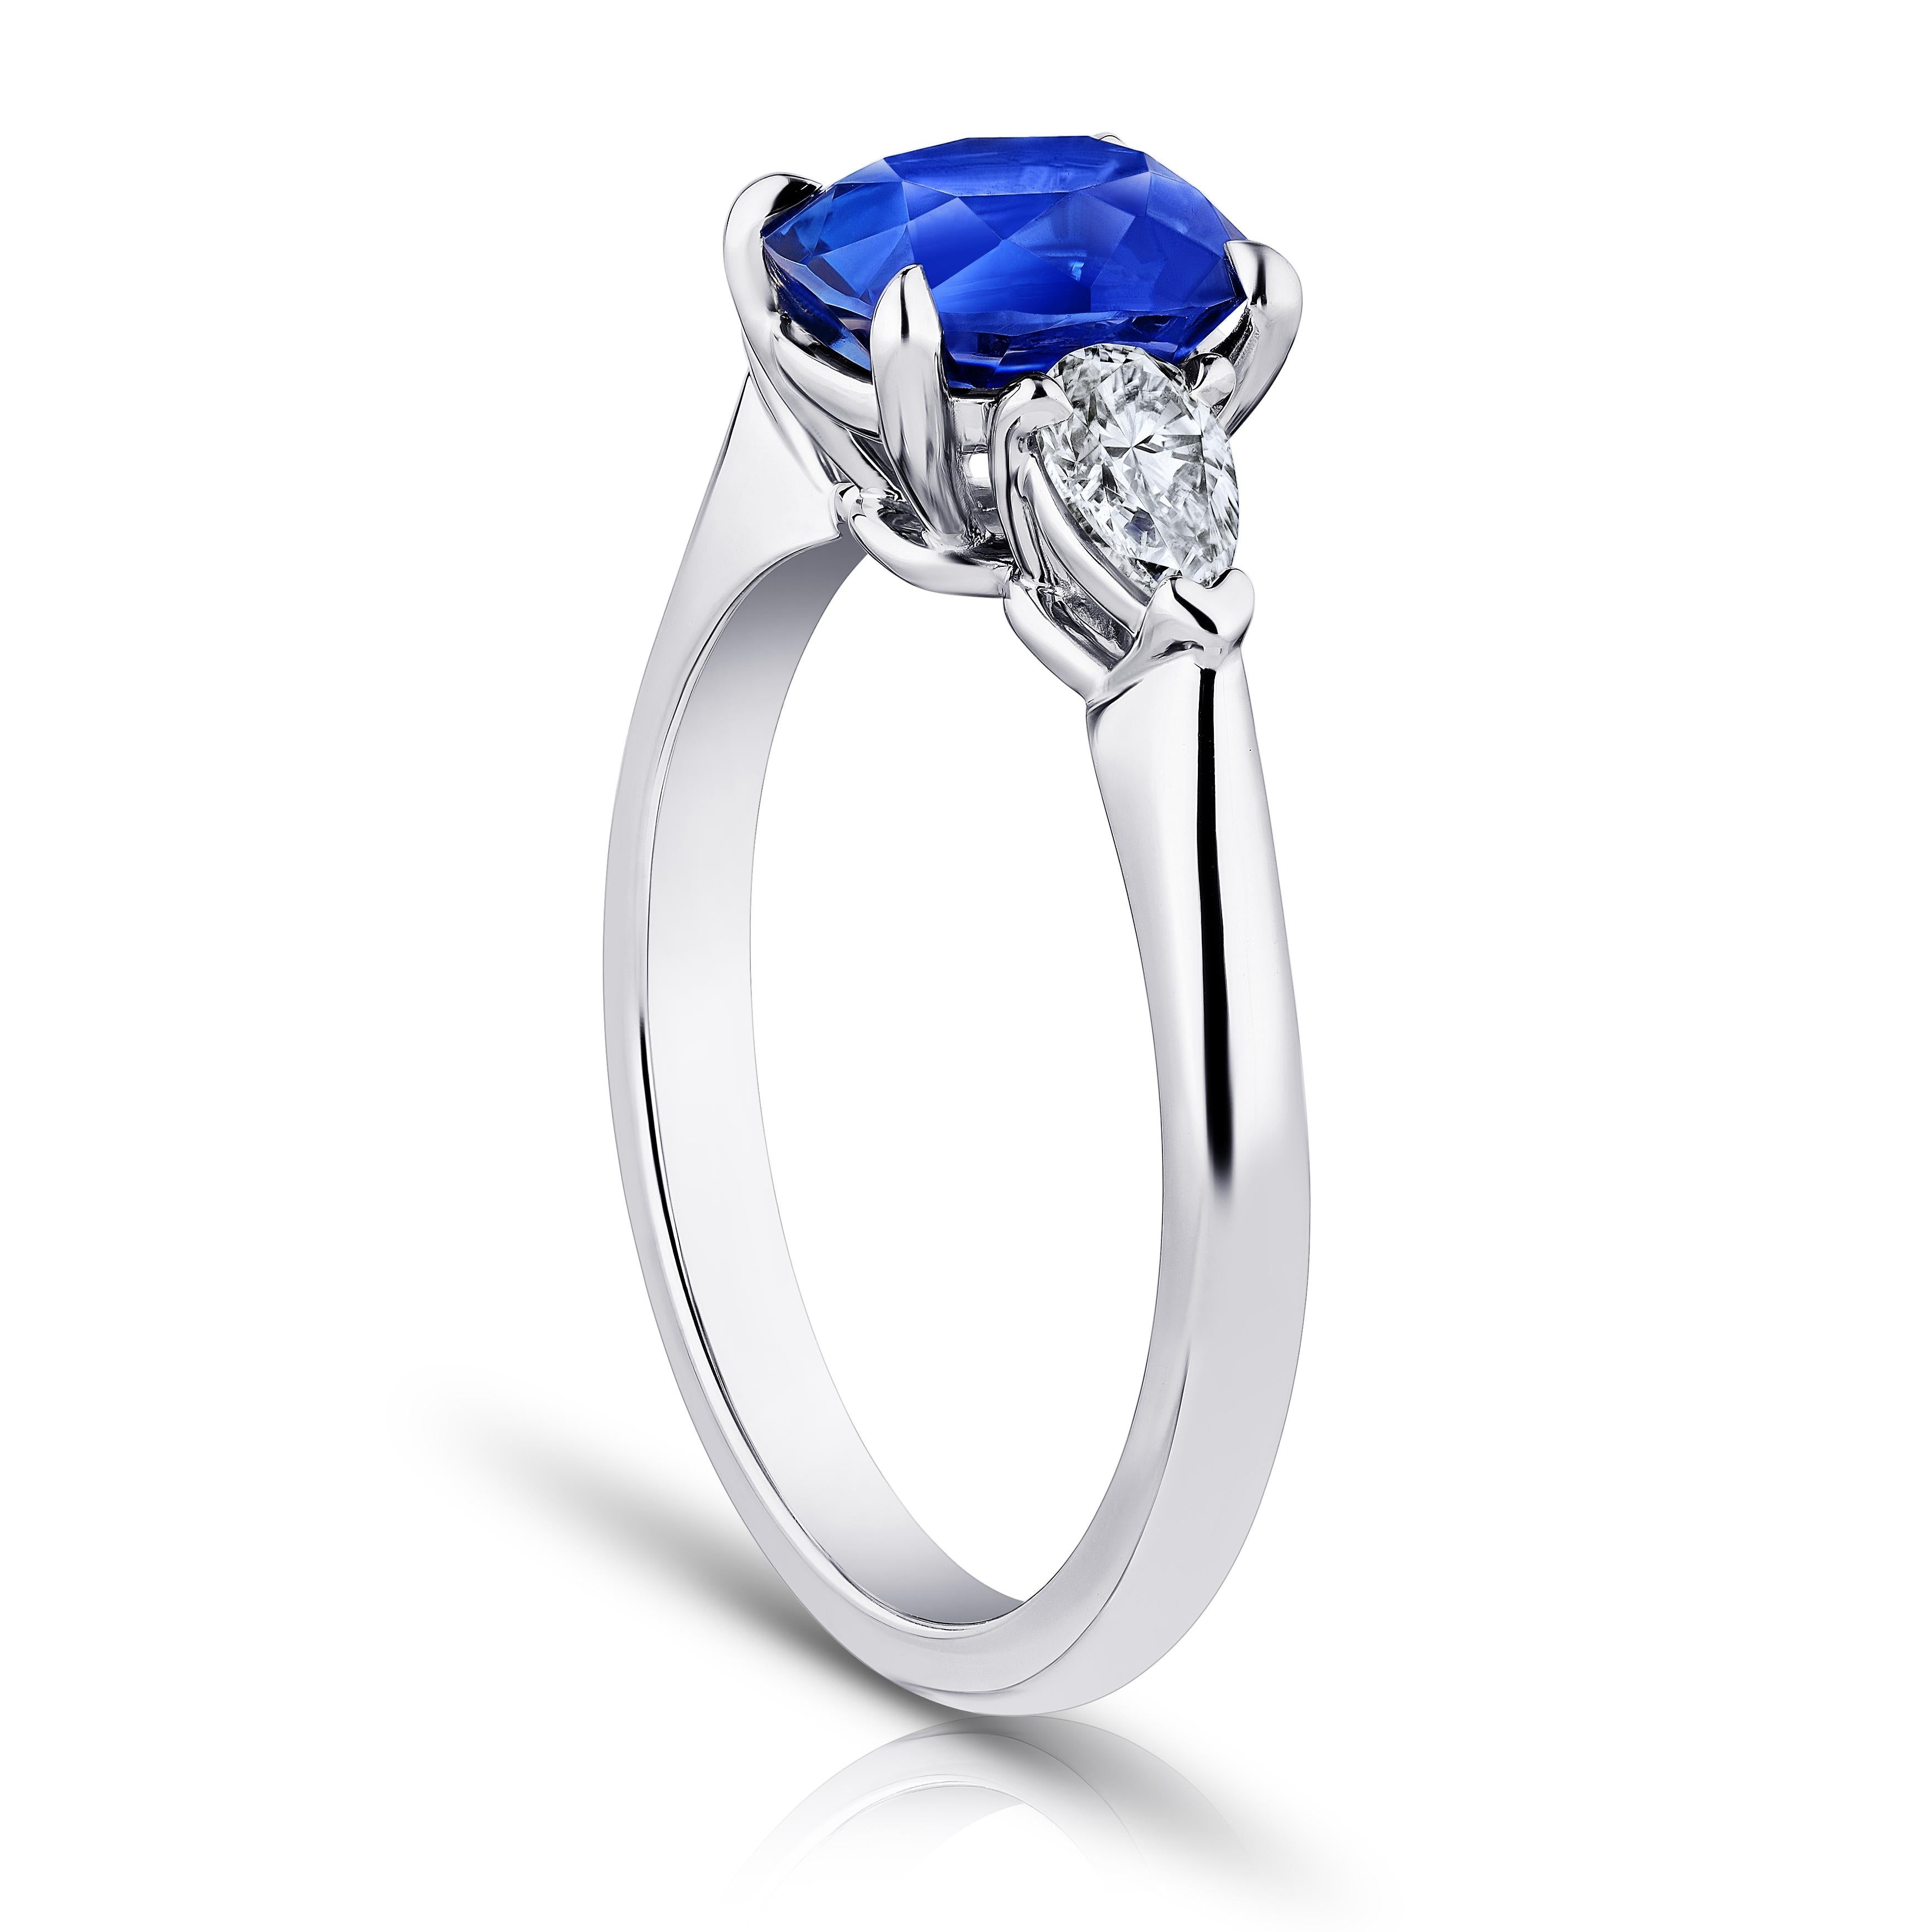 2.11 carat cushion blue sapphire with pear shape diamonds .49 carats set in a platinum ring. Size 7.